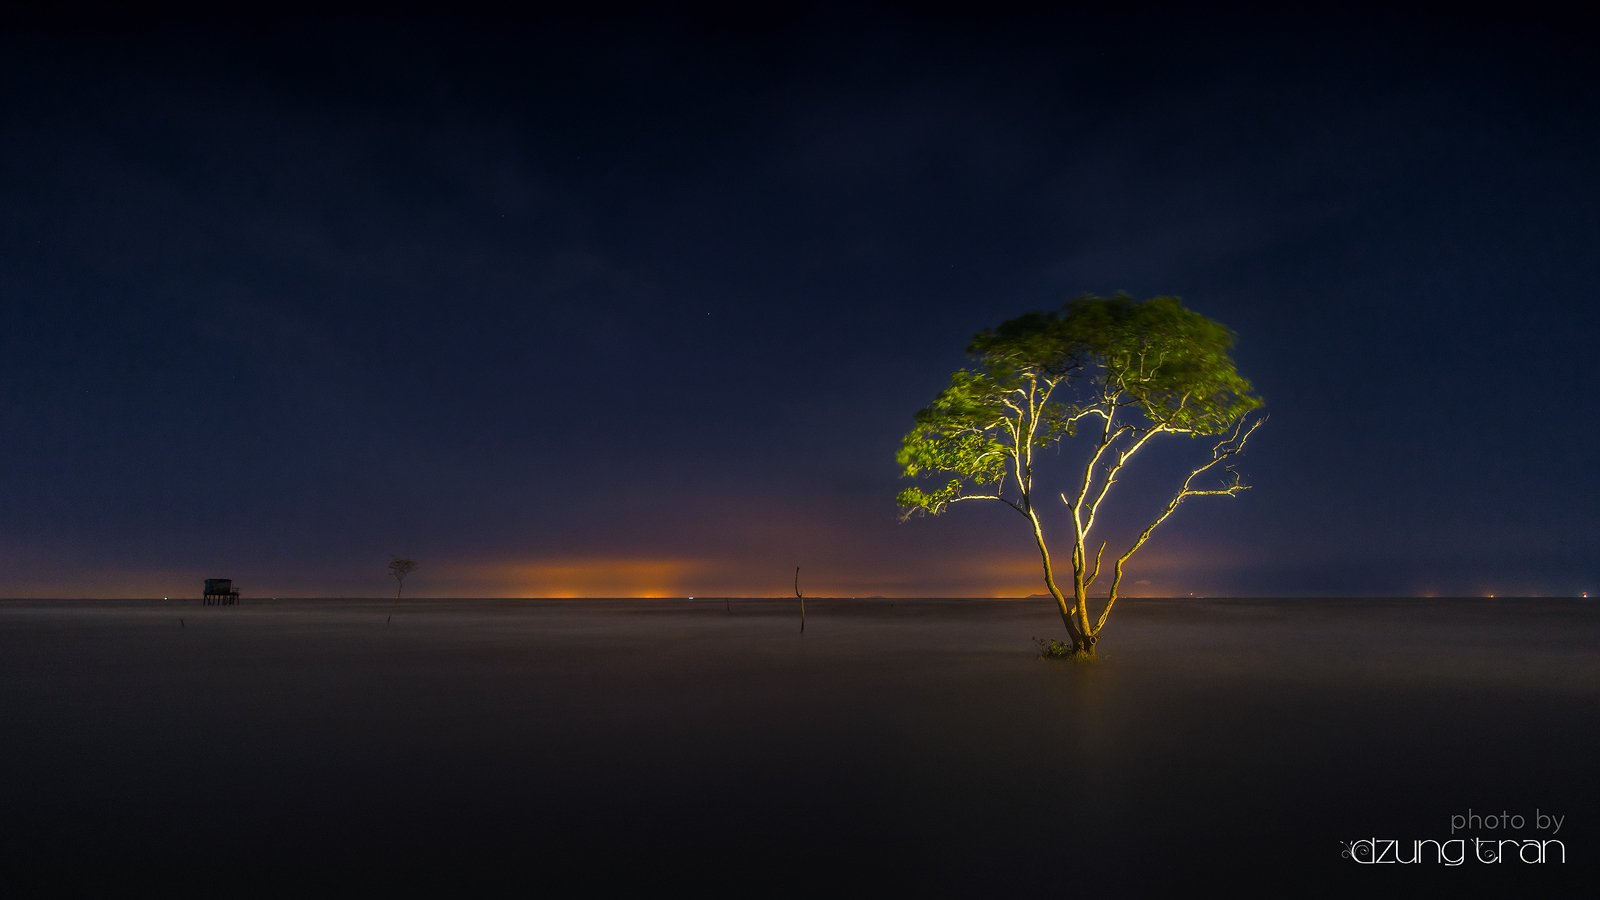 #lonely #tree #landscape, Dzung Tran